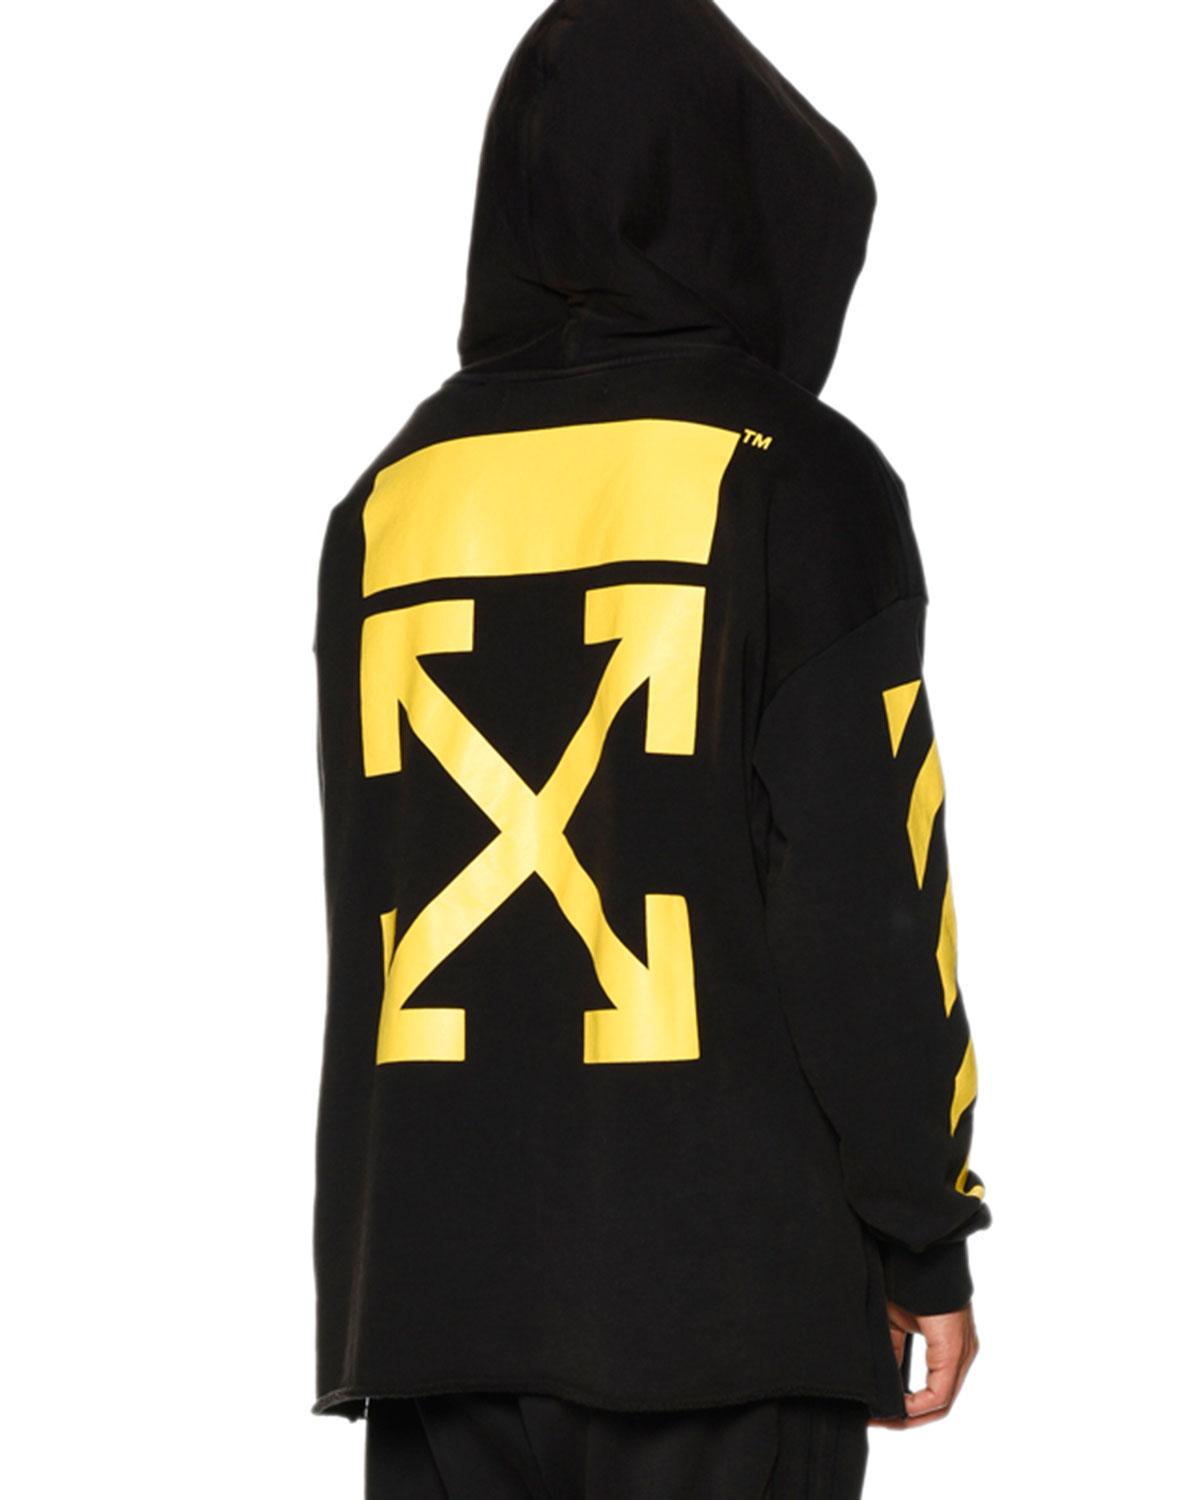 off white black and yellow hoodie,Free delivery,OFF63%,welcome to buy!